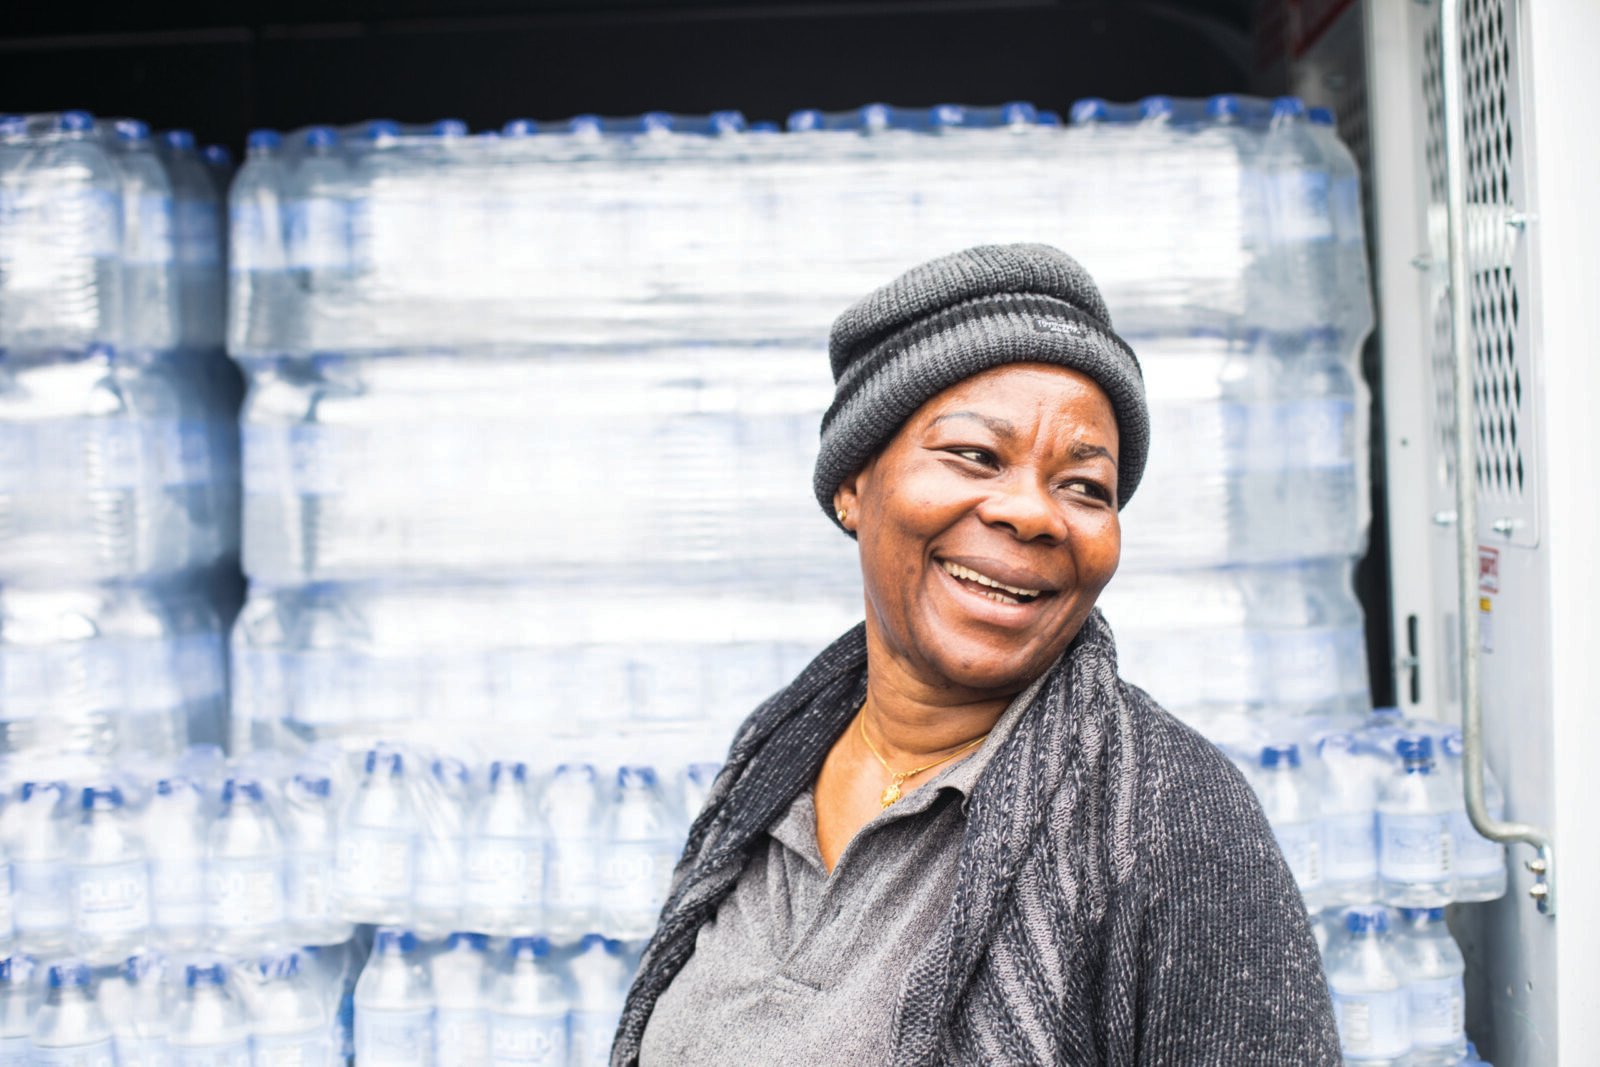 Atinuke, a woman with dark skin in a gray hat and clothes, smiles off to the right. She is standing in front of a wall of plastic water bottles in cases. 